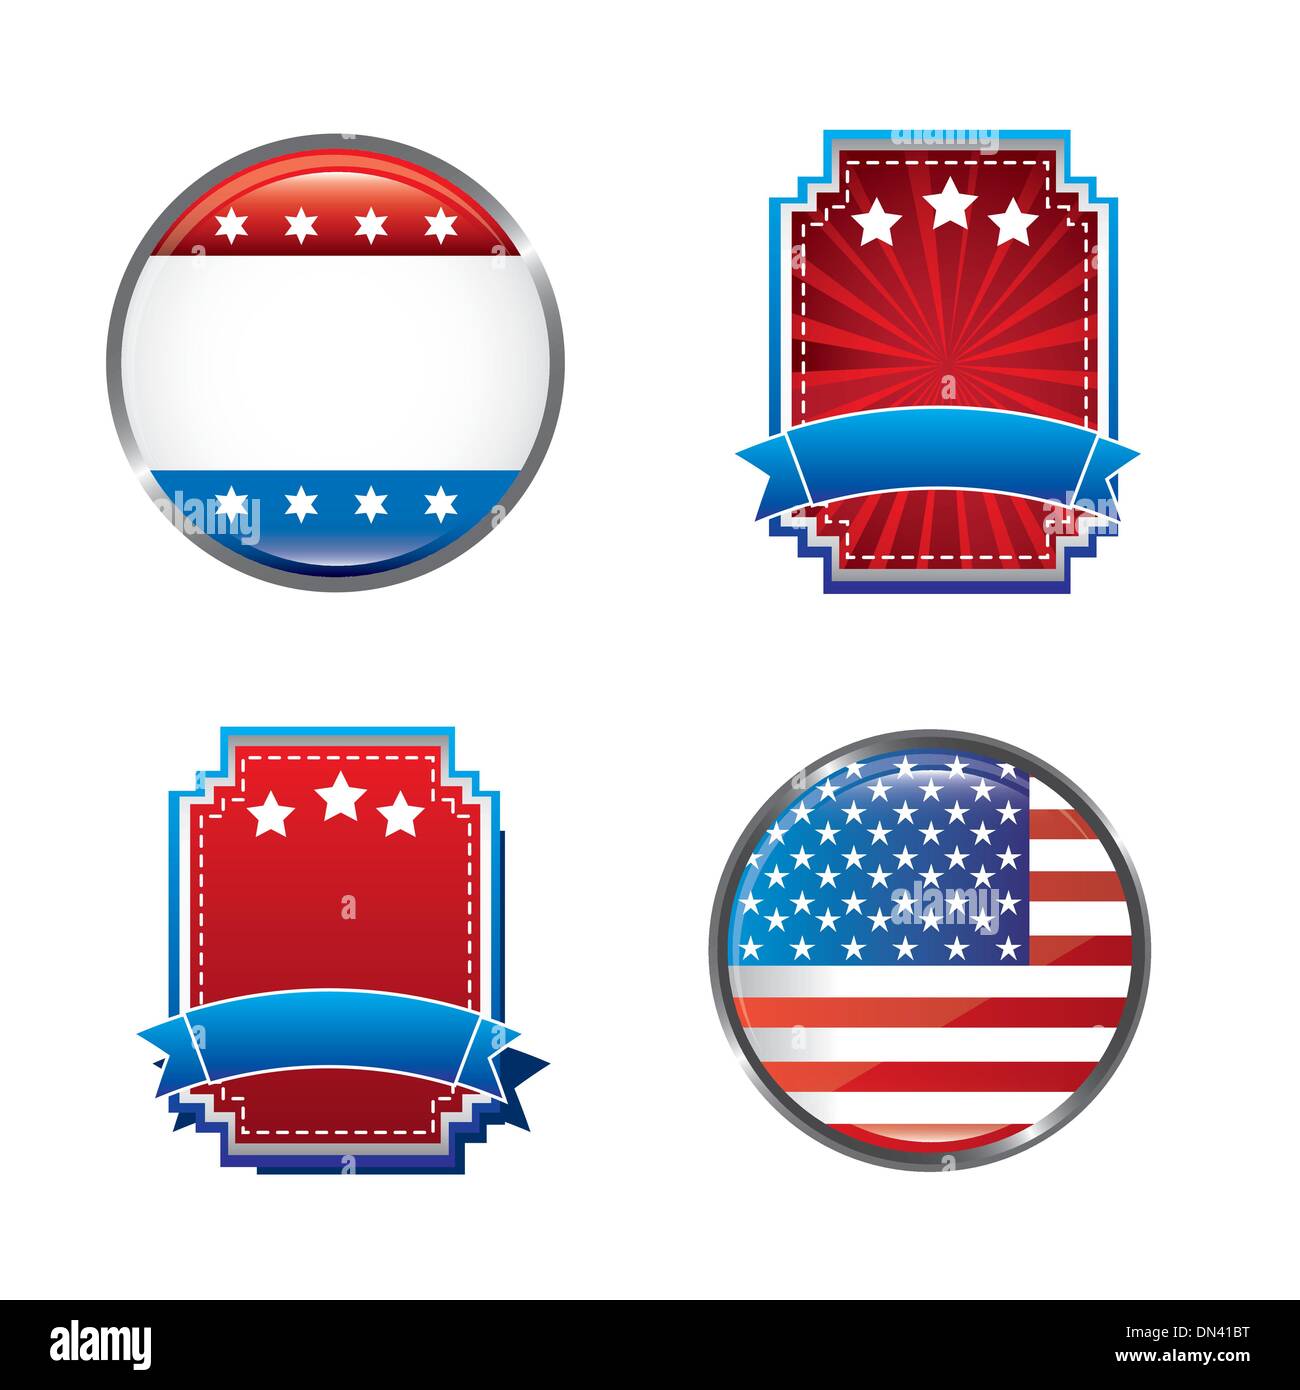 united states Stock Vector